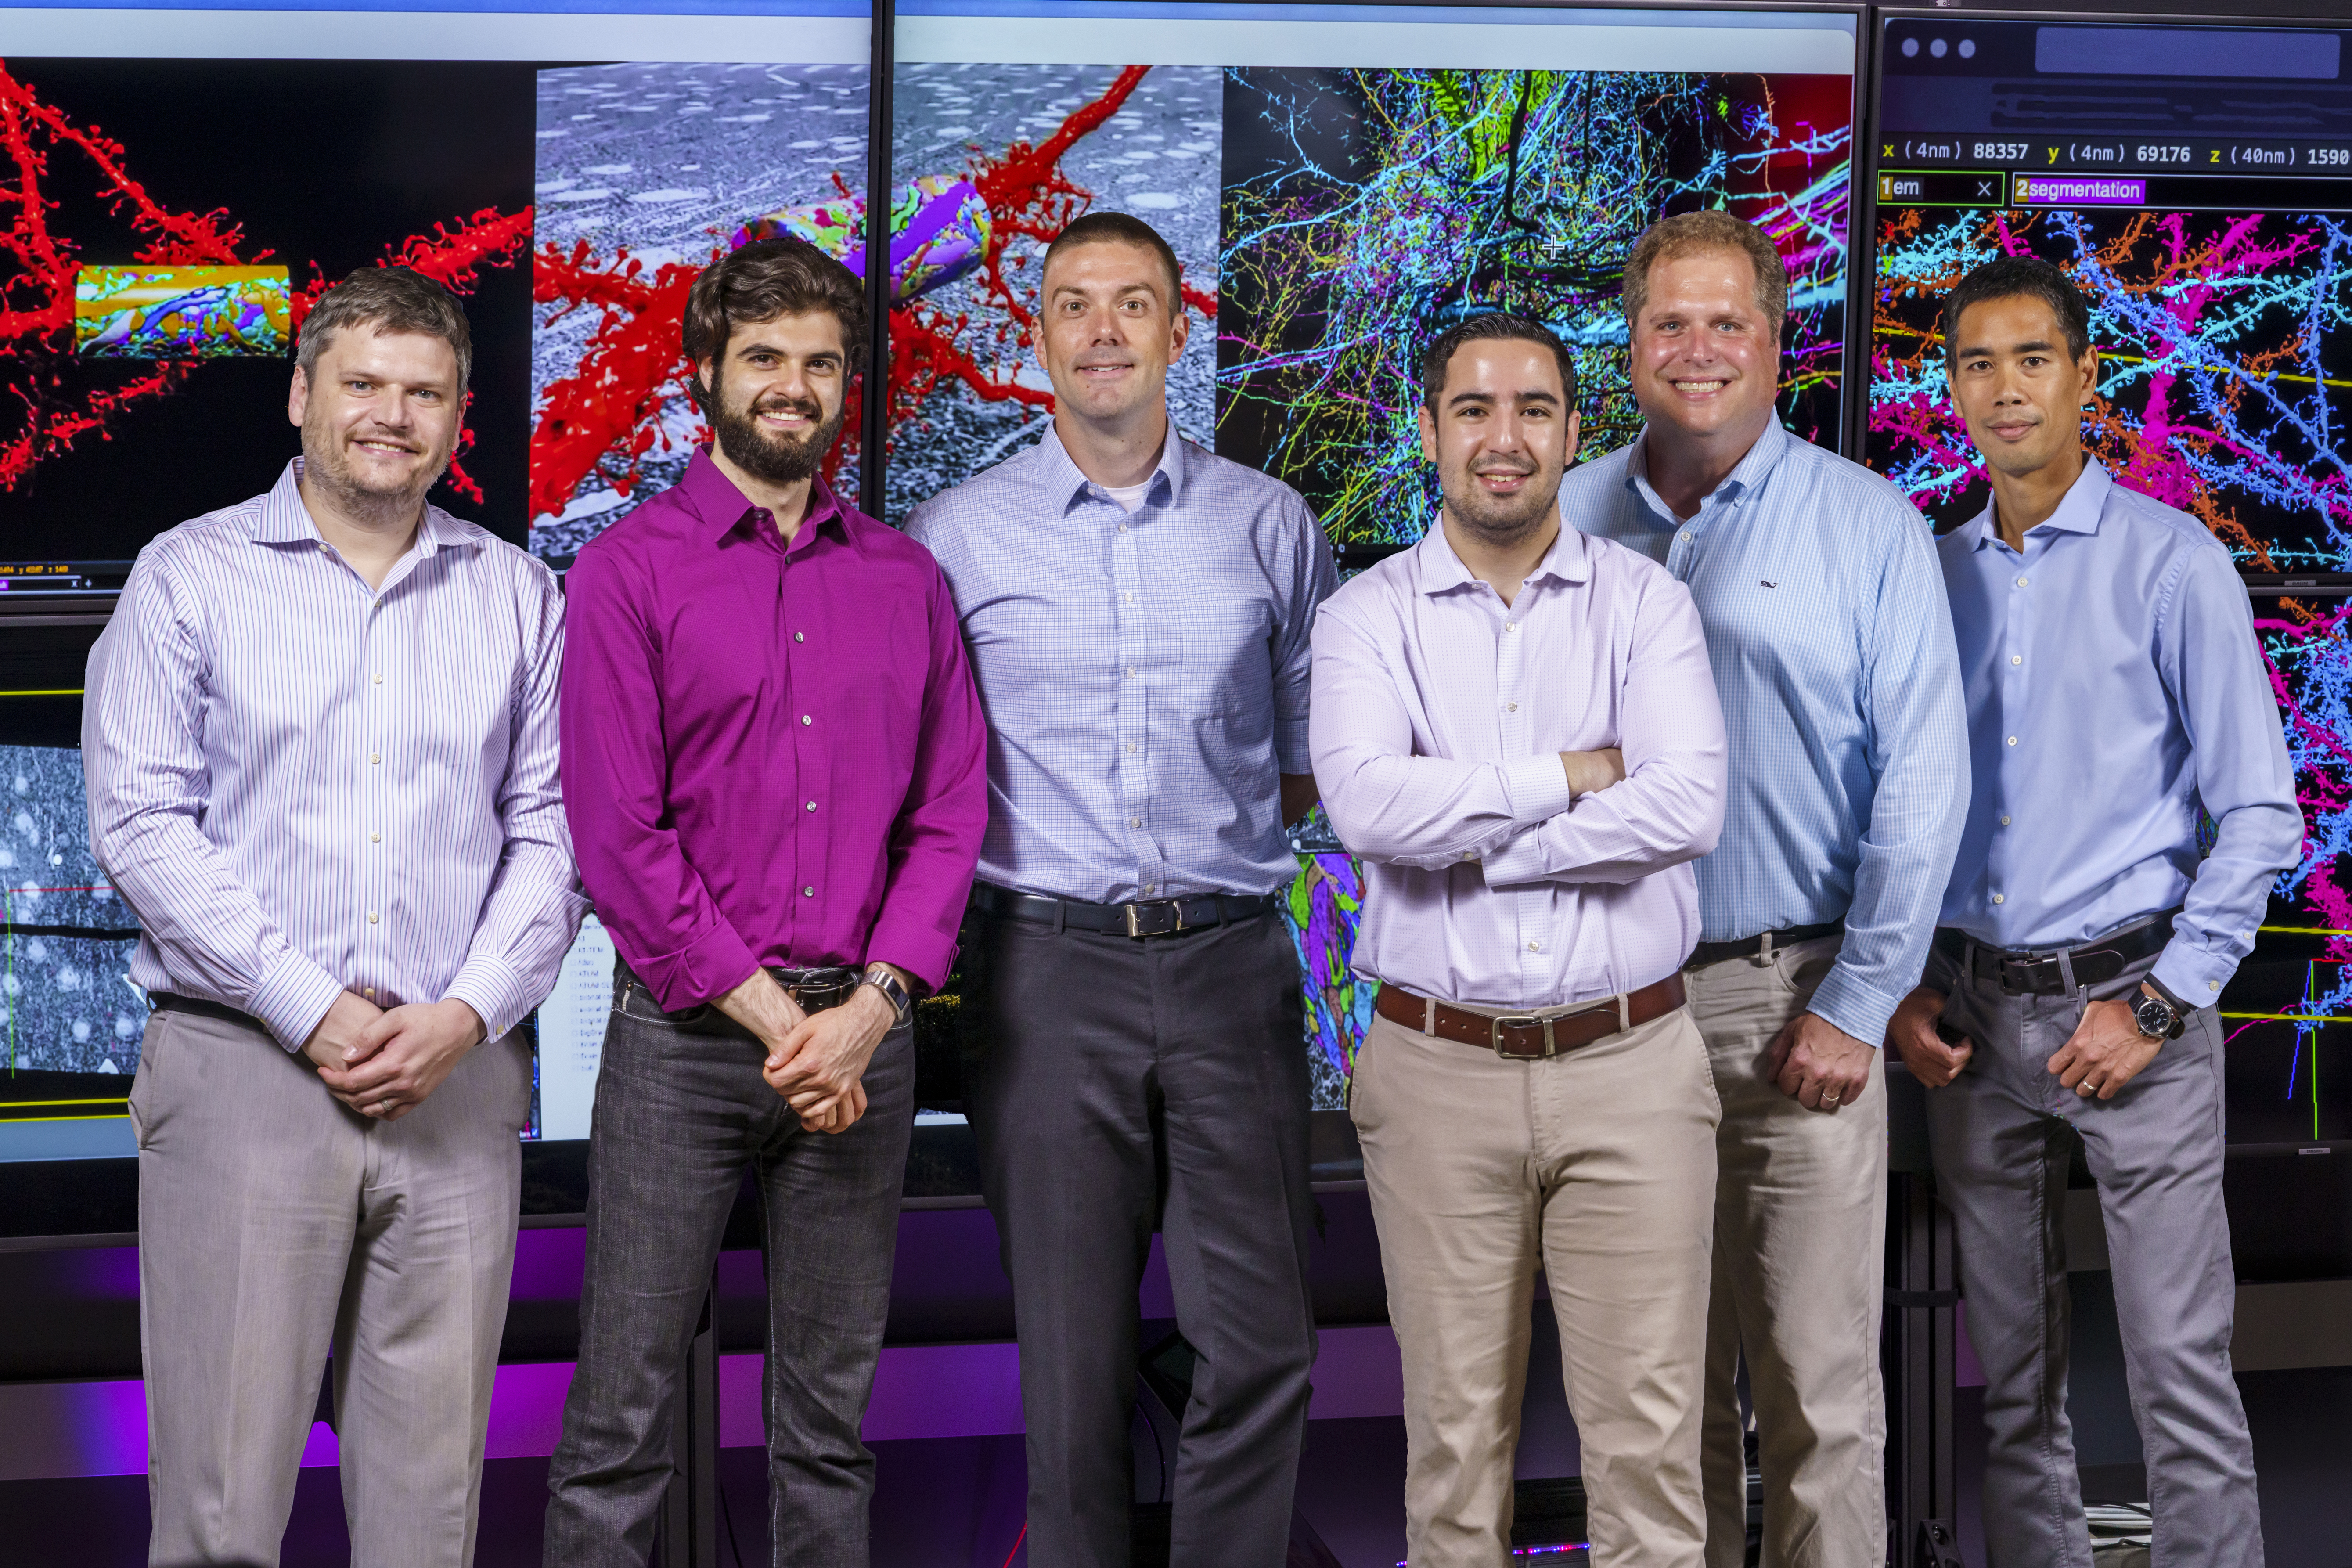 The BossDB team at APL (from left): Will Gray Roncal, Jordan Matelsky, Brock Wester, Daniel Xenes, Sandy Hider and Timothy Gion.  Credit: Johns Hopkins APL/Craig Weiman